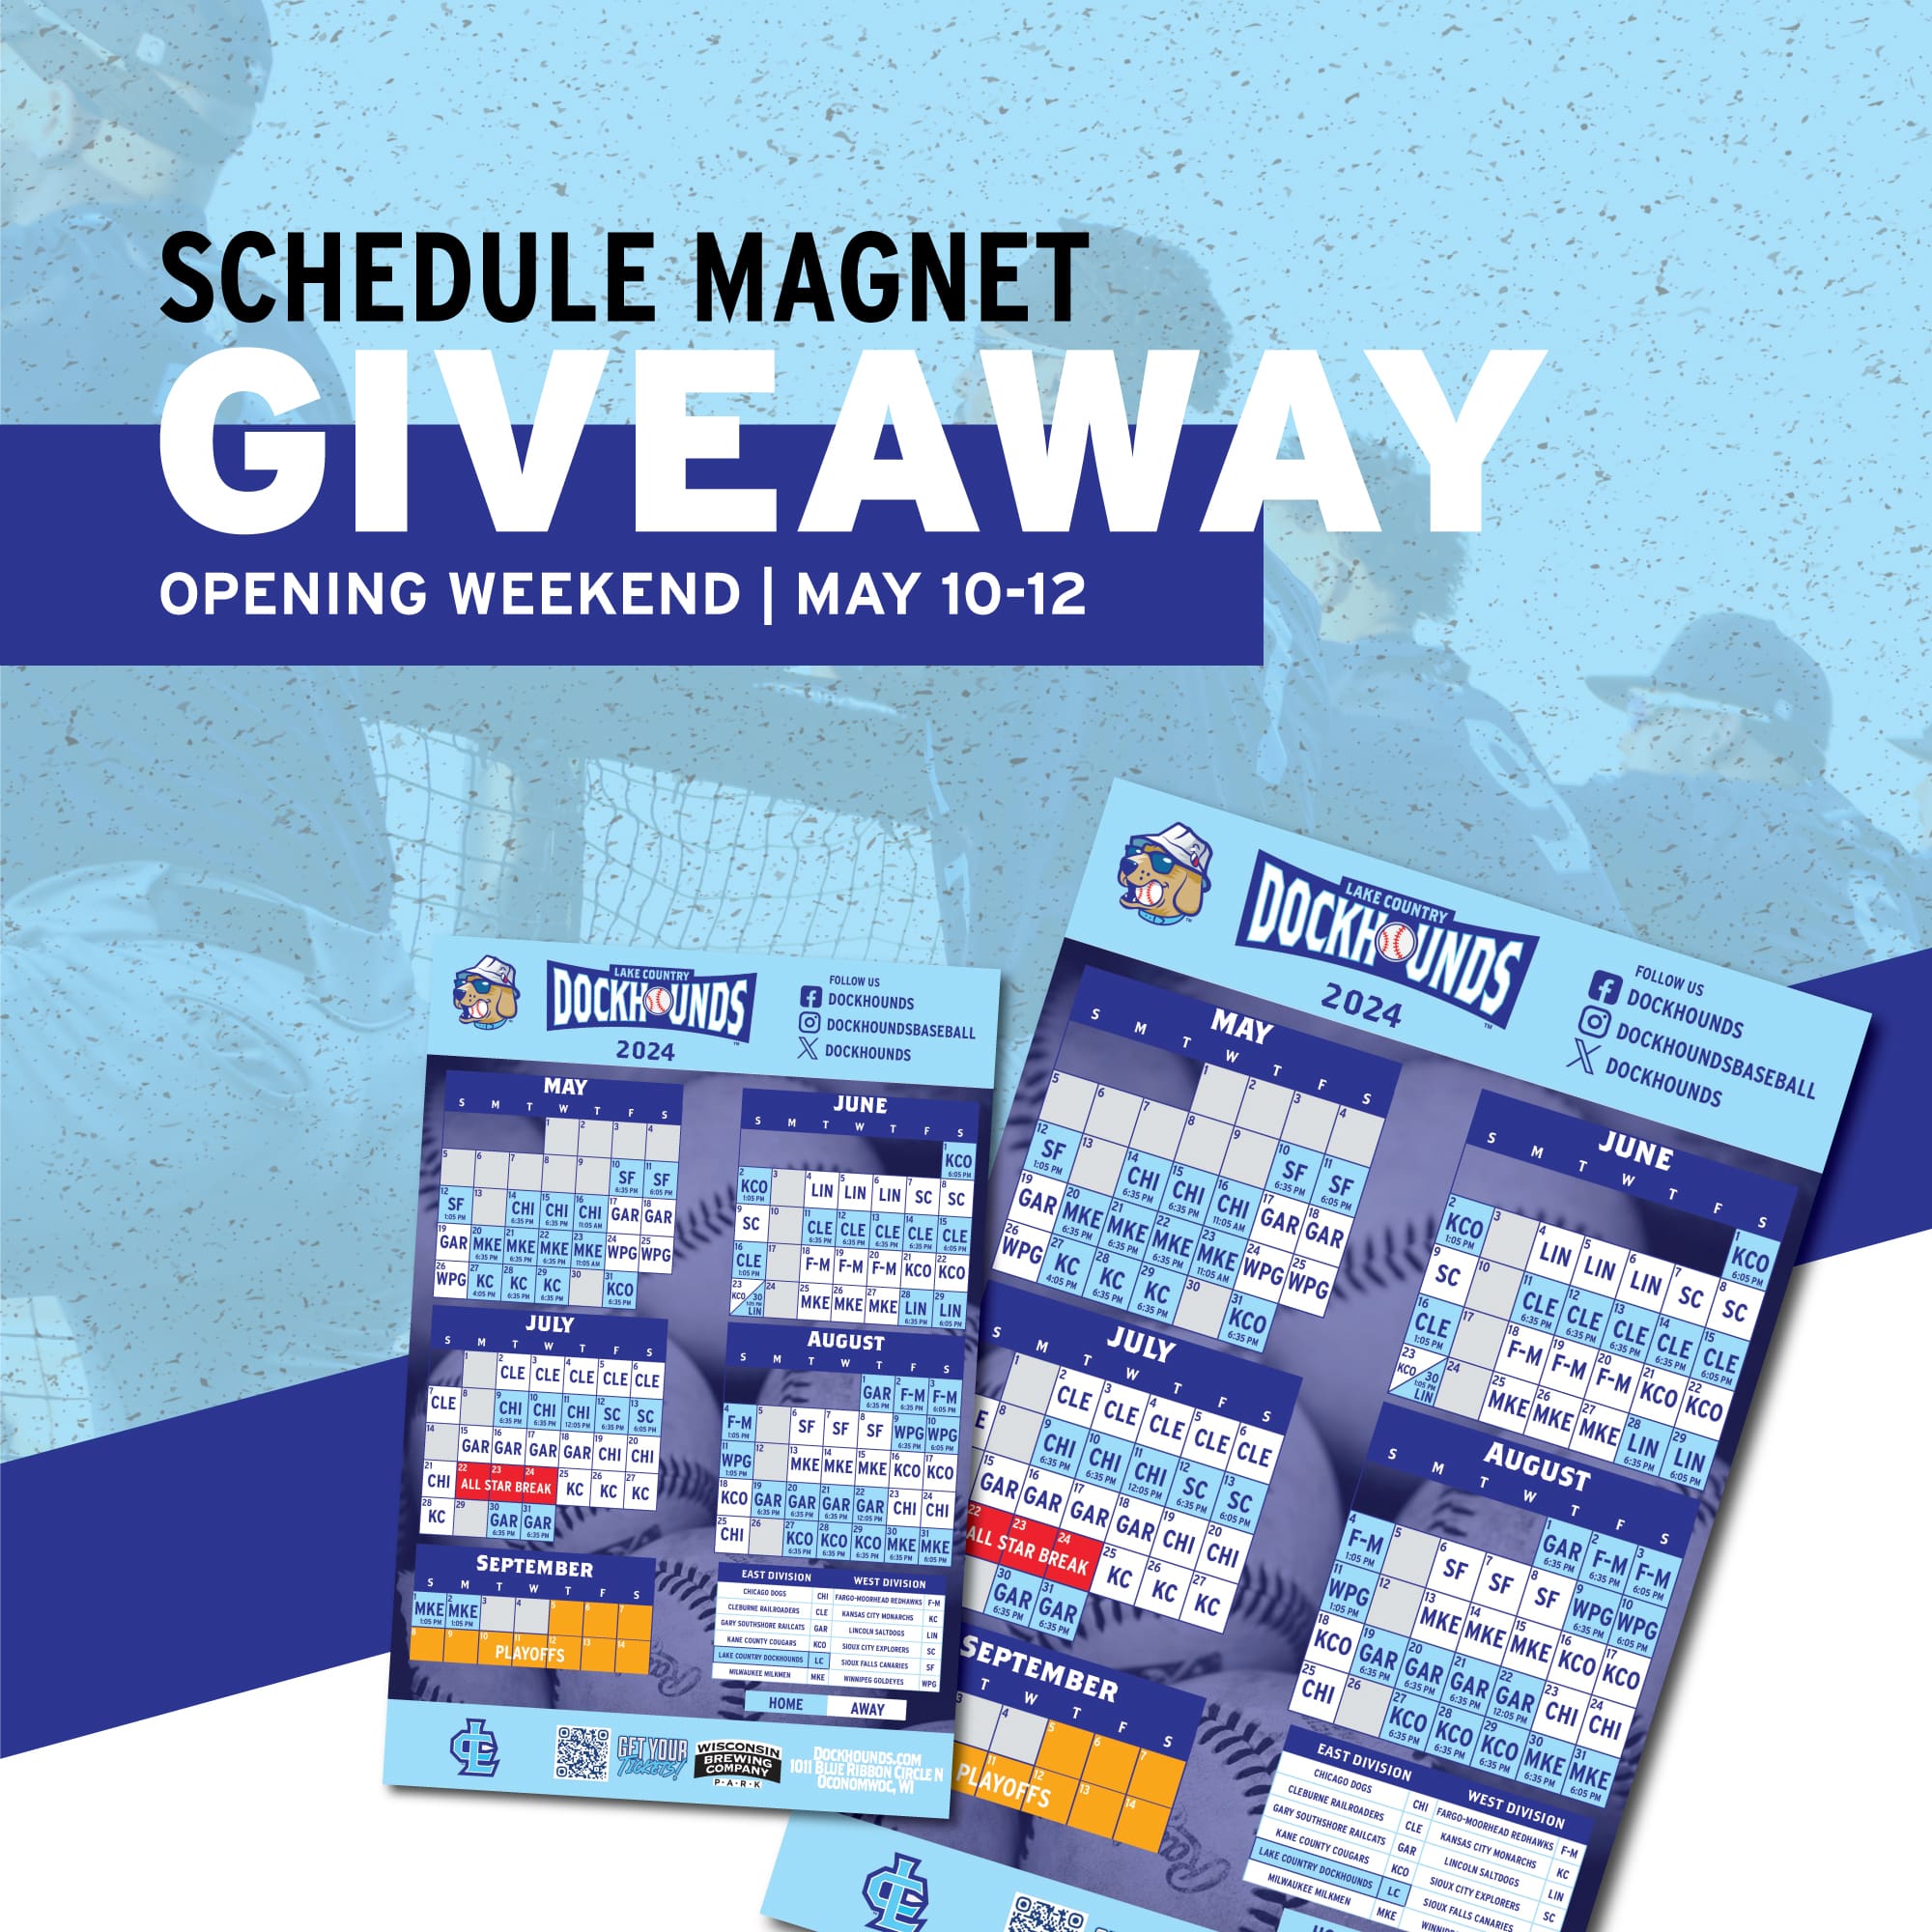 2024 Schedule magnet give away